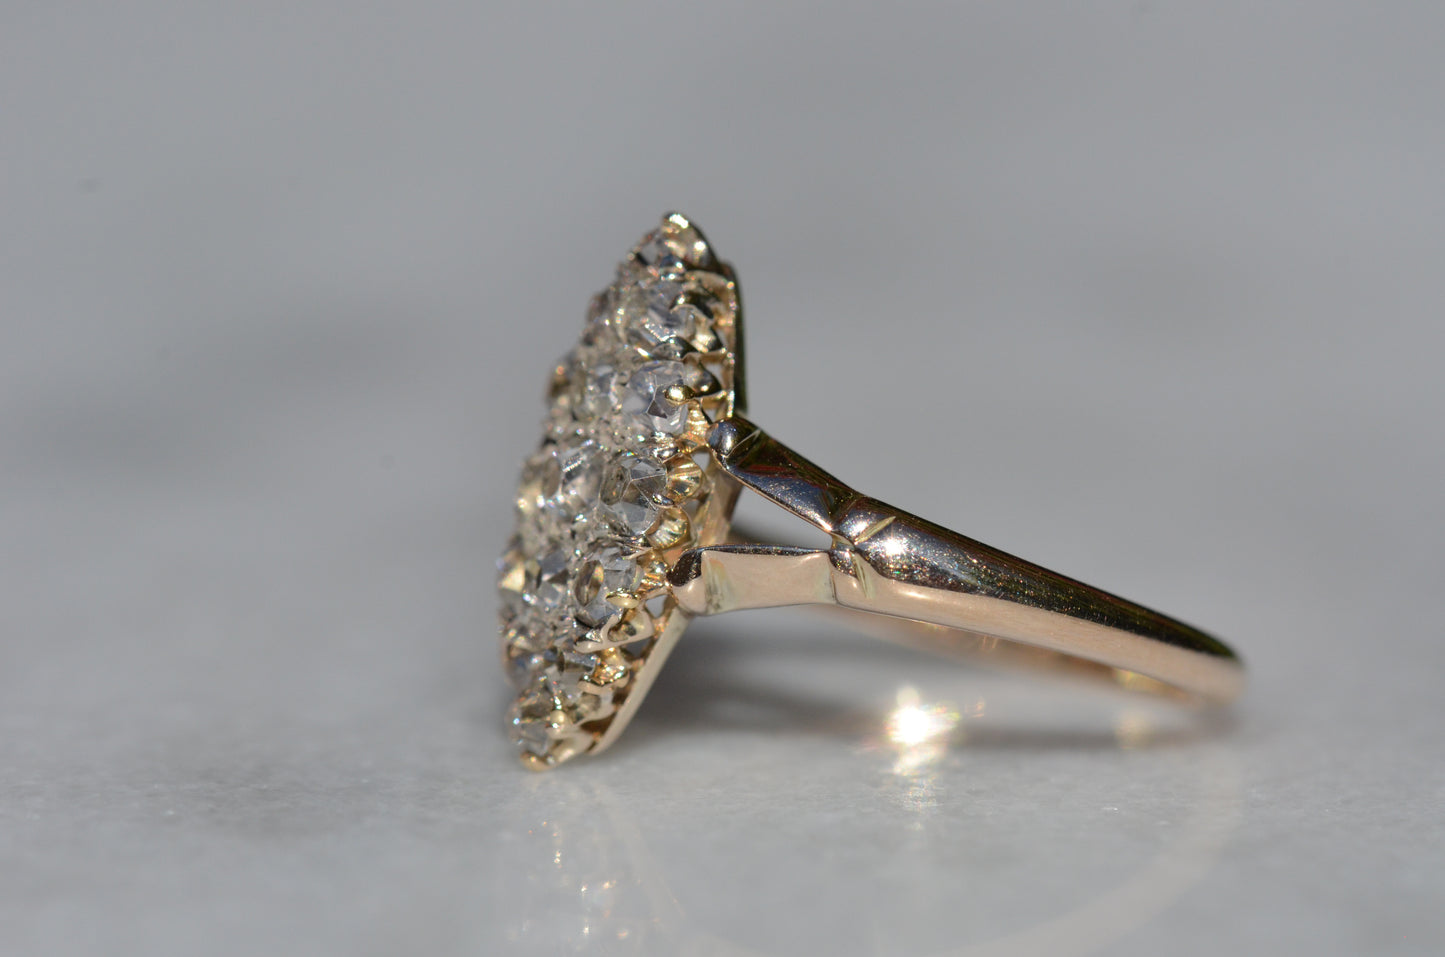 The closely cropped macro of this Victorian diamond navette ring is photographed turned to the left to highlight the split shoulder detail of the band, and a side view of the diamonds that highlights their tall crown facets.